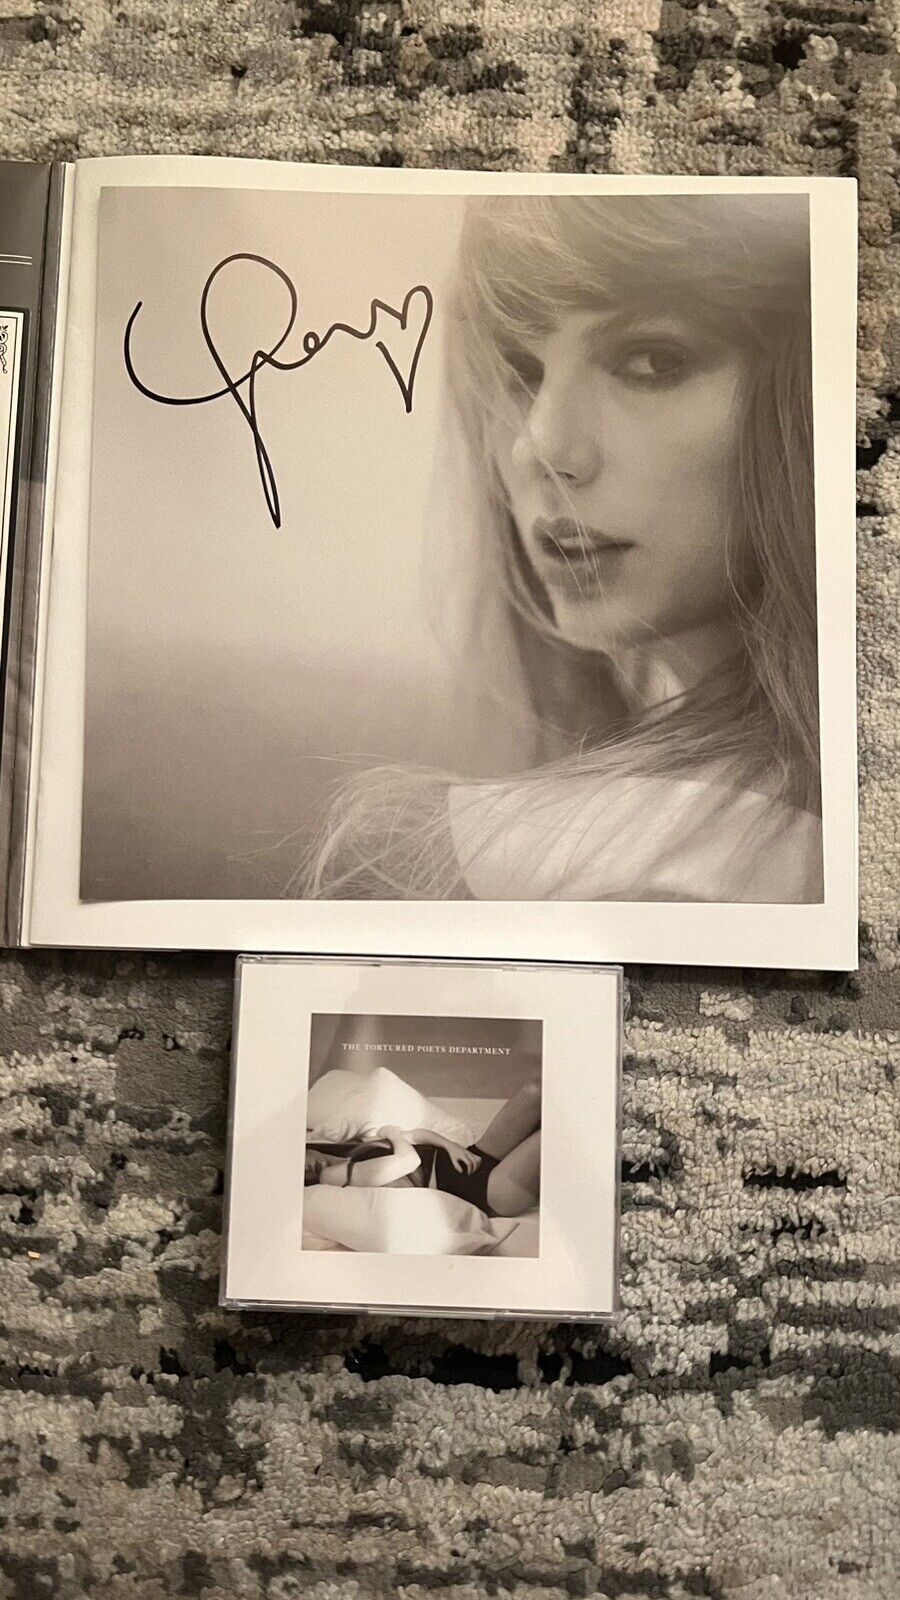 Taylor Swift  The Tortured Poets Department Vinyl + Signed Photo w/  RARE HEART